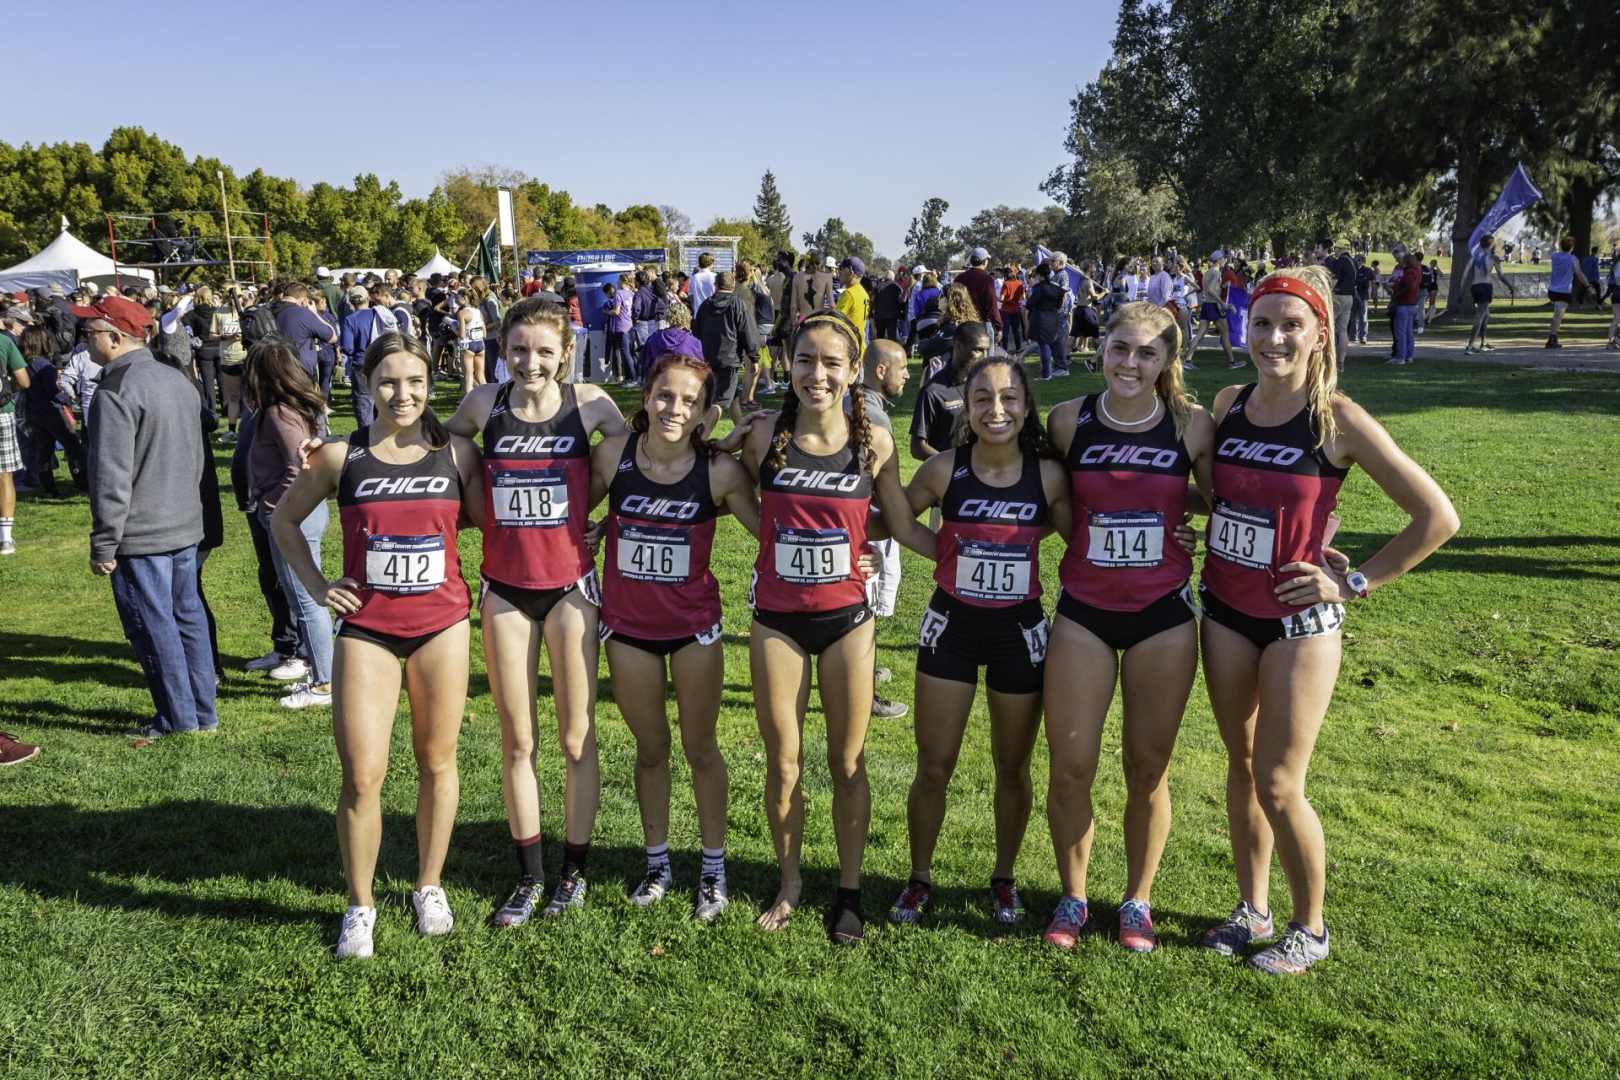 A women's cross country team poses after a race, with a crowd of people behind them.